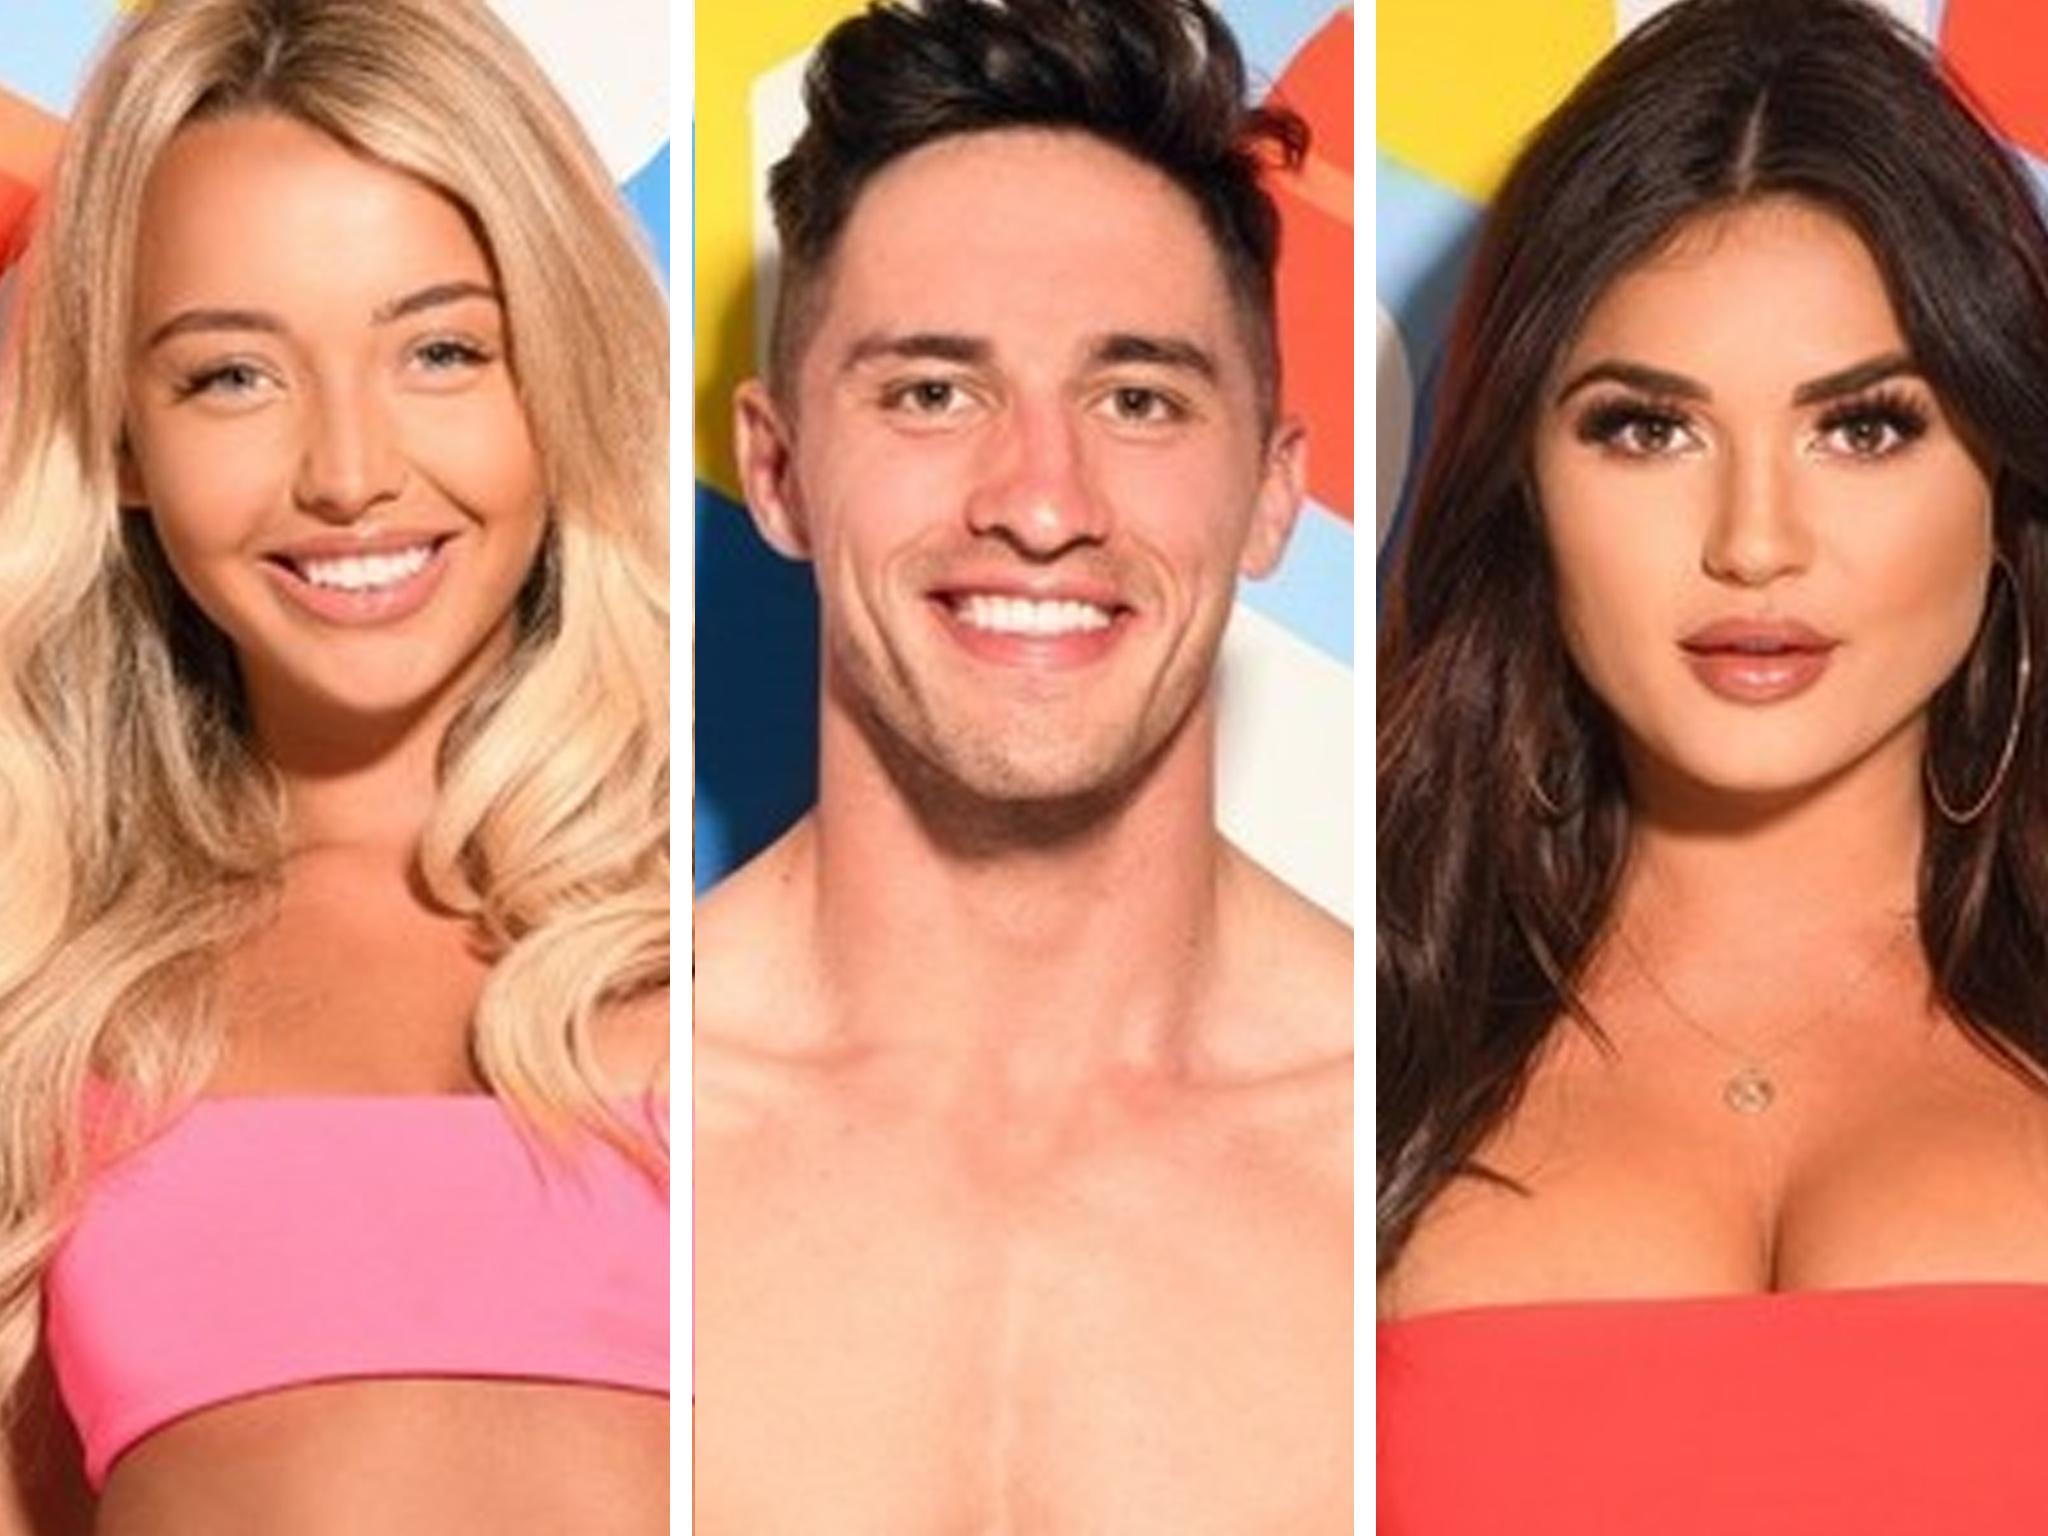 Love Island First look at new contestants Harley, India and Greg after